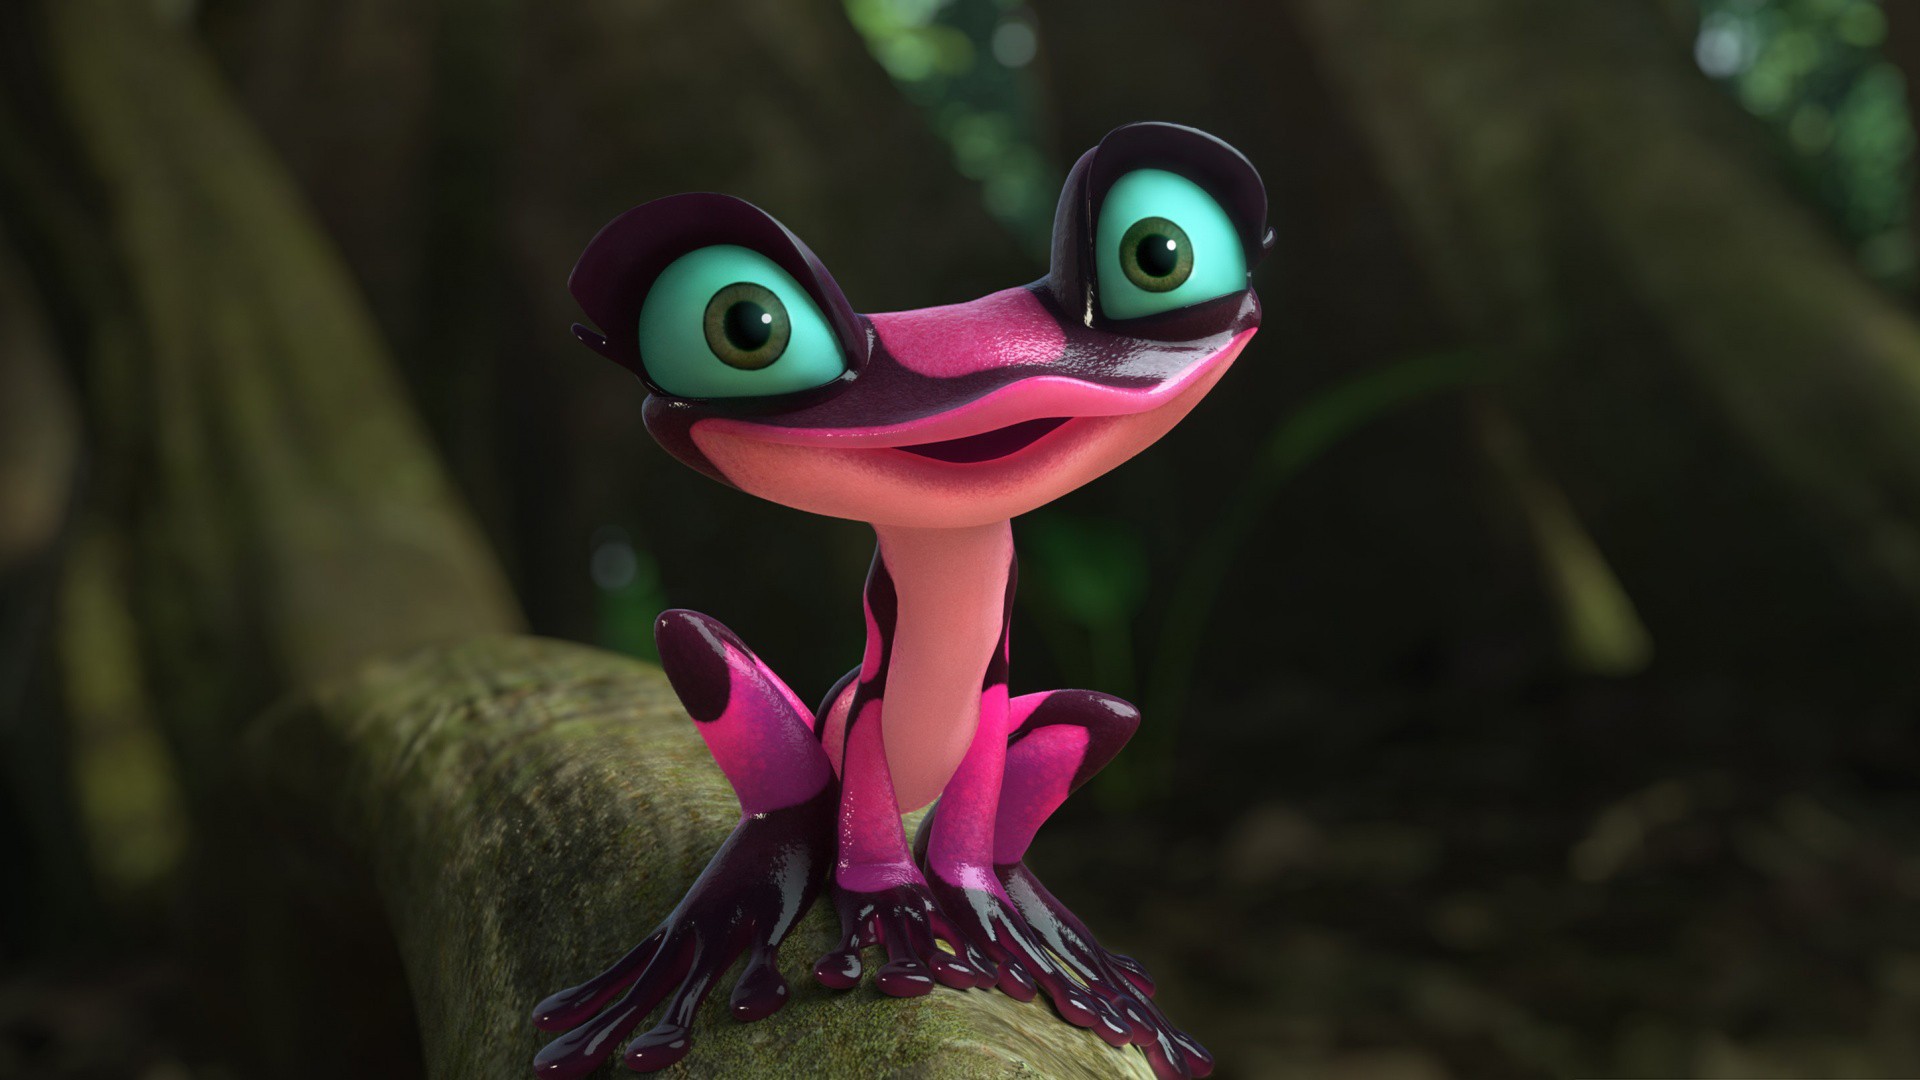 Cute frog cartoon wallpapers and images - wallpapers, pictures, photos